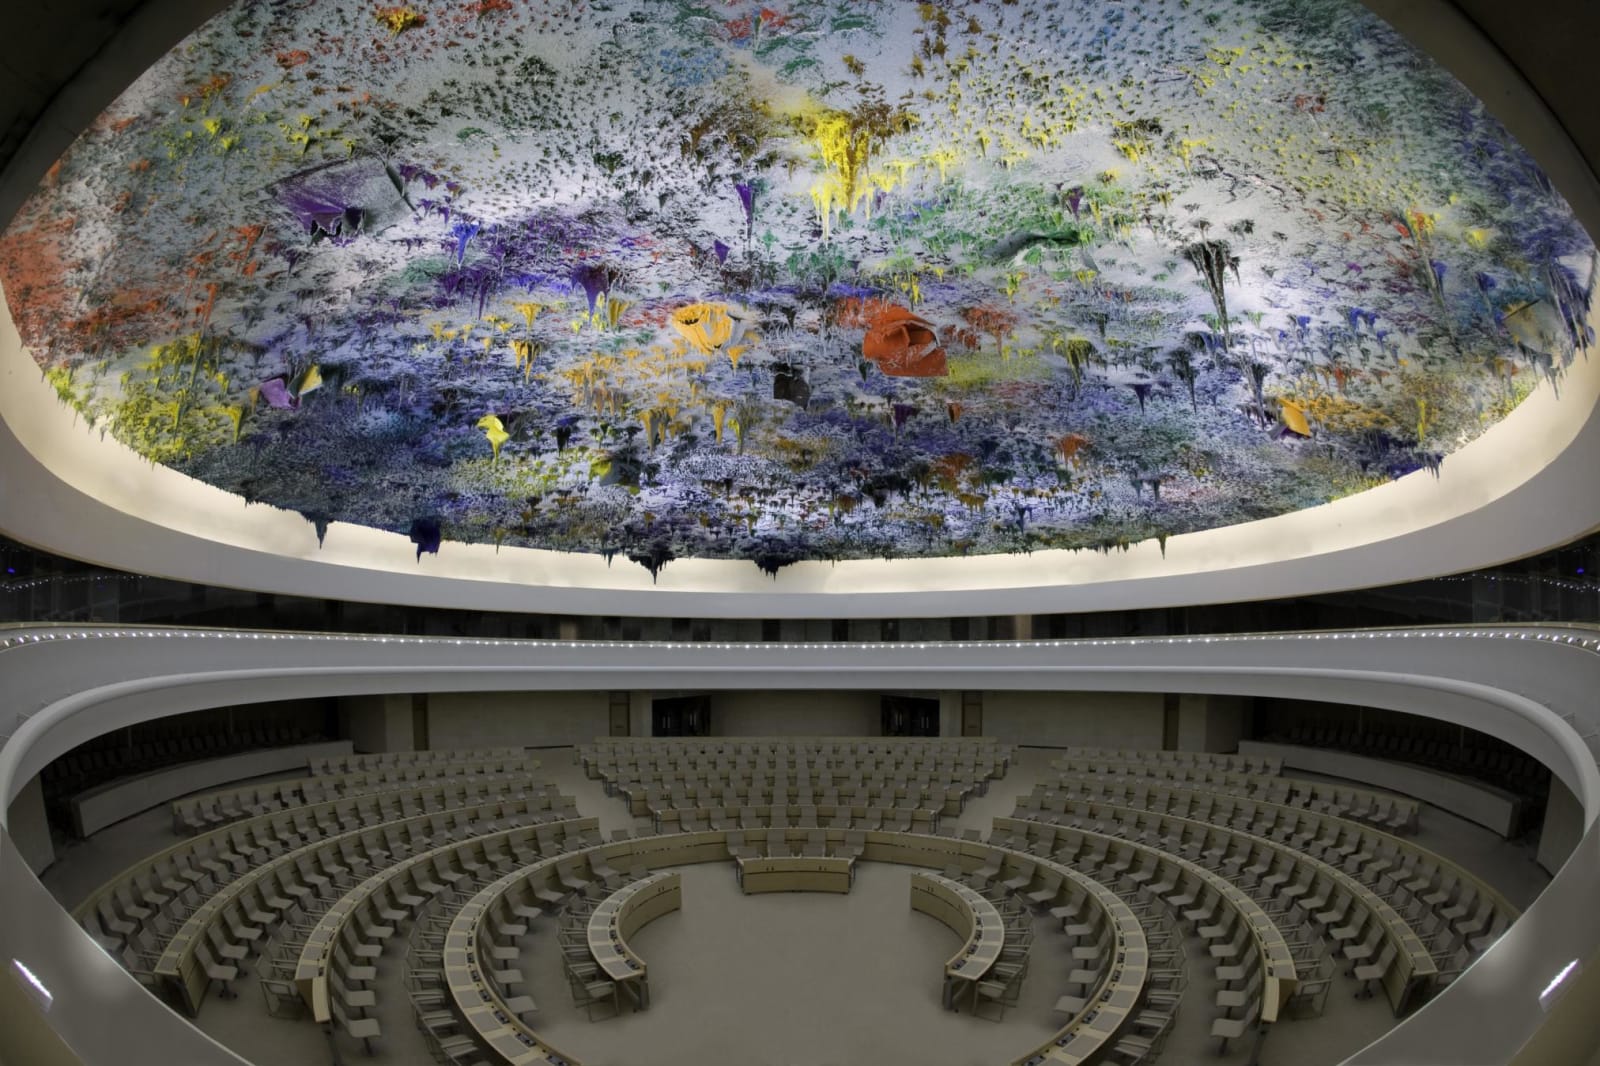 <a href="/content/feature/1707/detail/image29623/" class="pageload-link-type-popup-enabled-content"><div class="cms_size_1"><div><div><p>Installation view, Human Rights and Alliance of Civilisations Chamber, United Nations' Palais des Nations, Geneva</p></div></div></div></a>